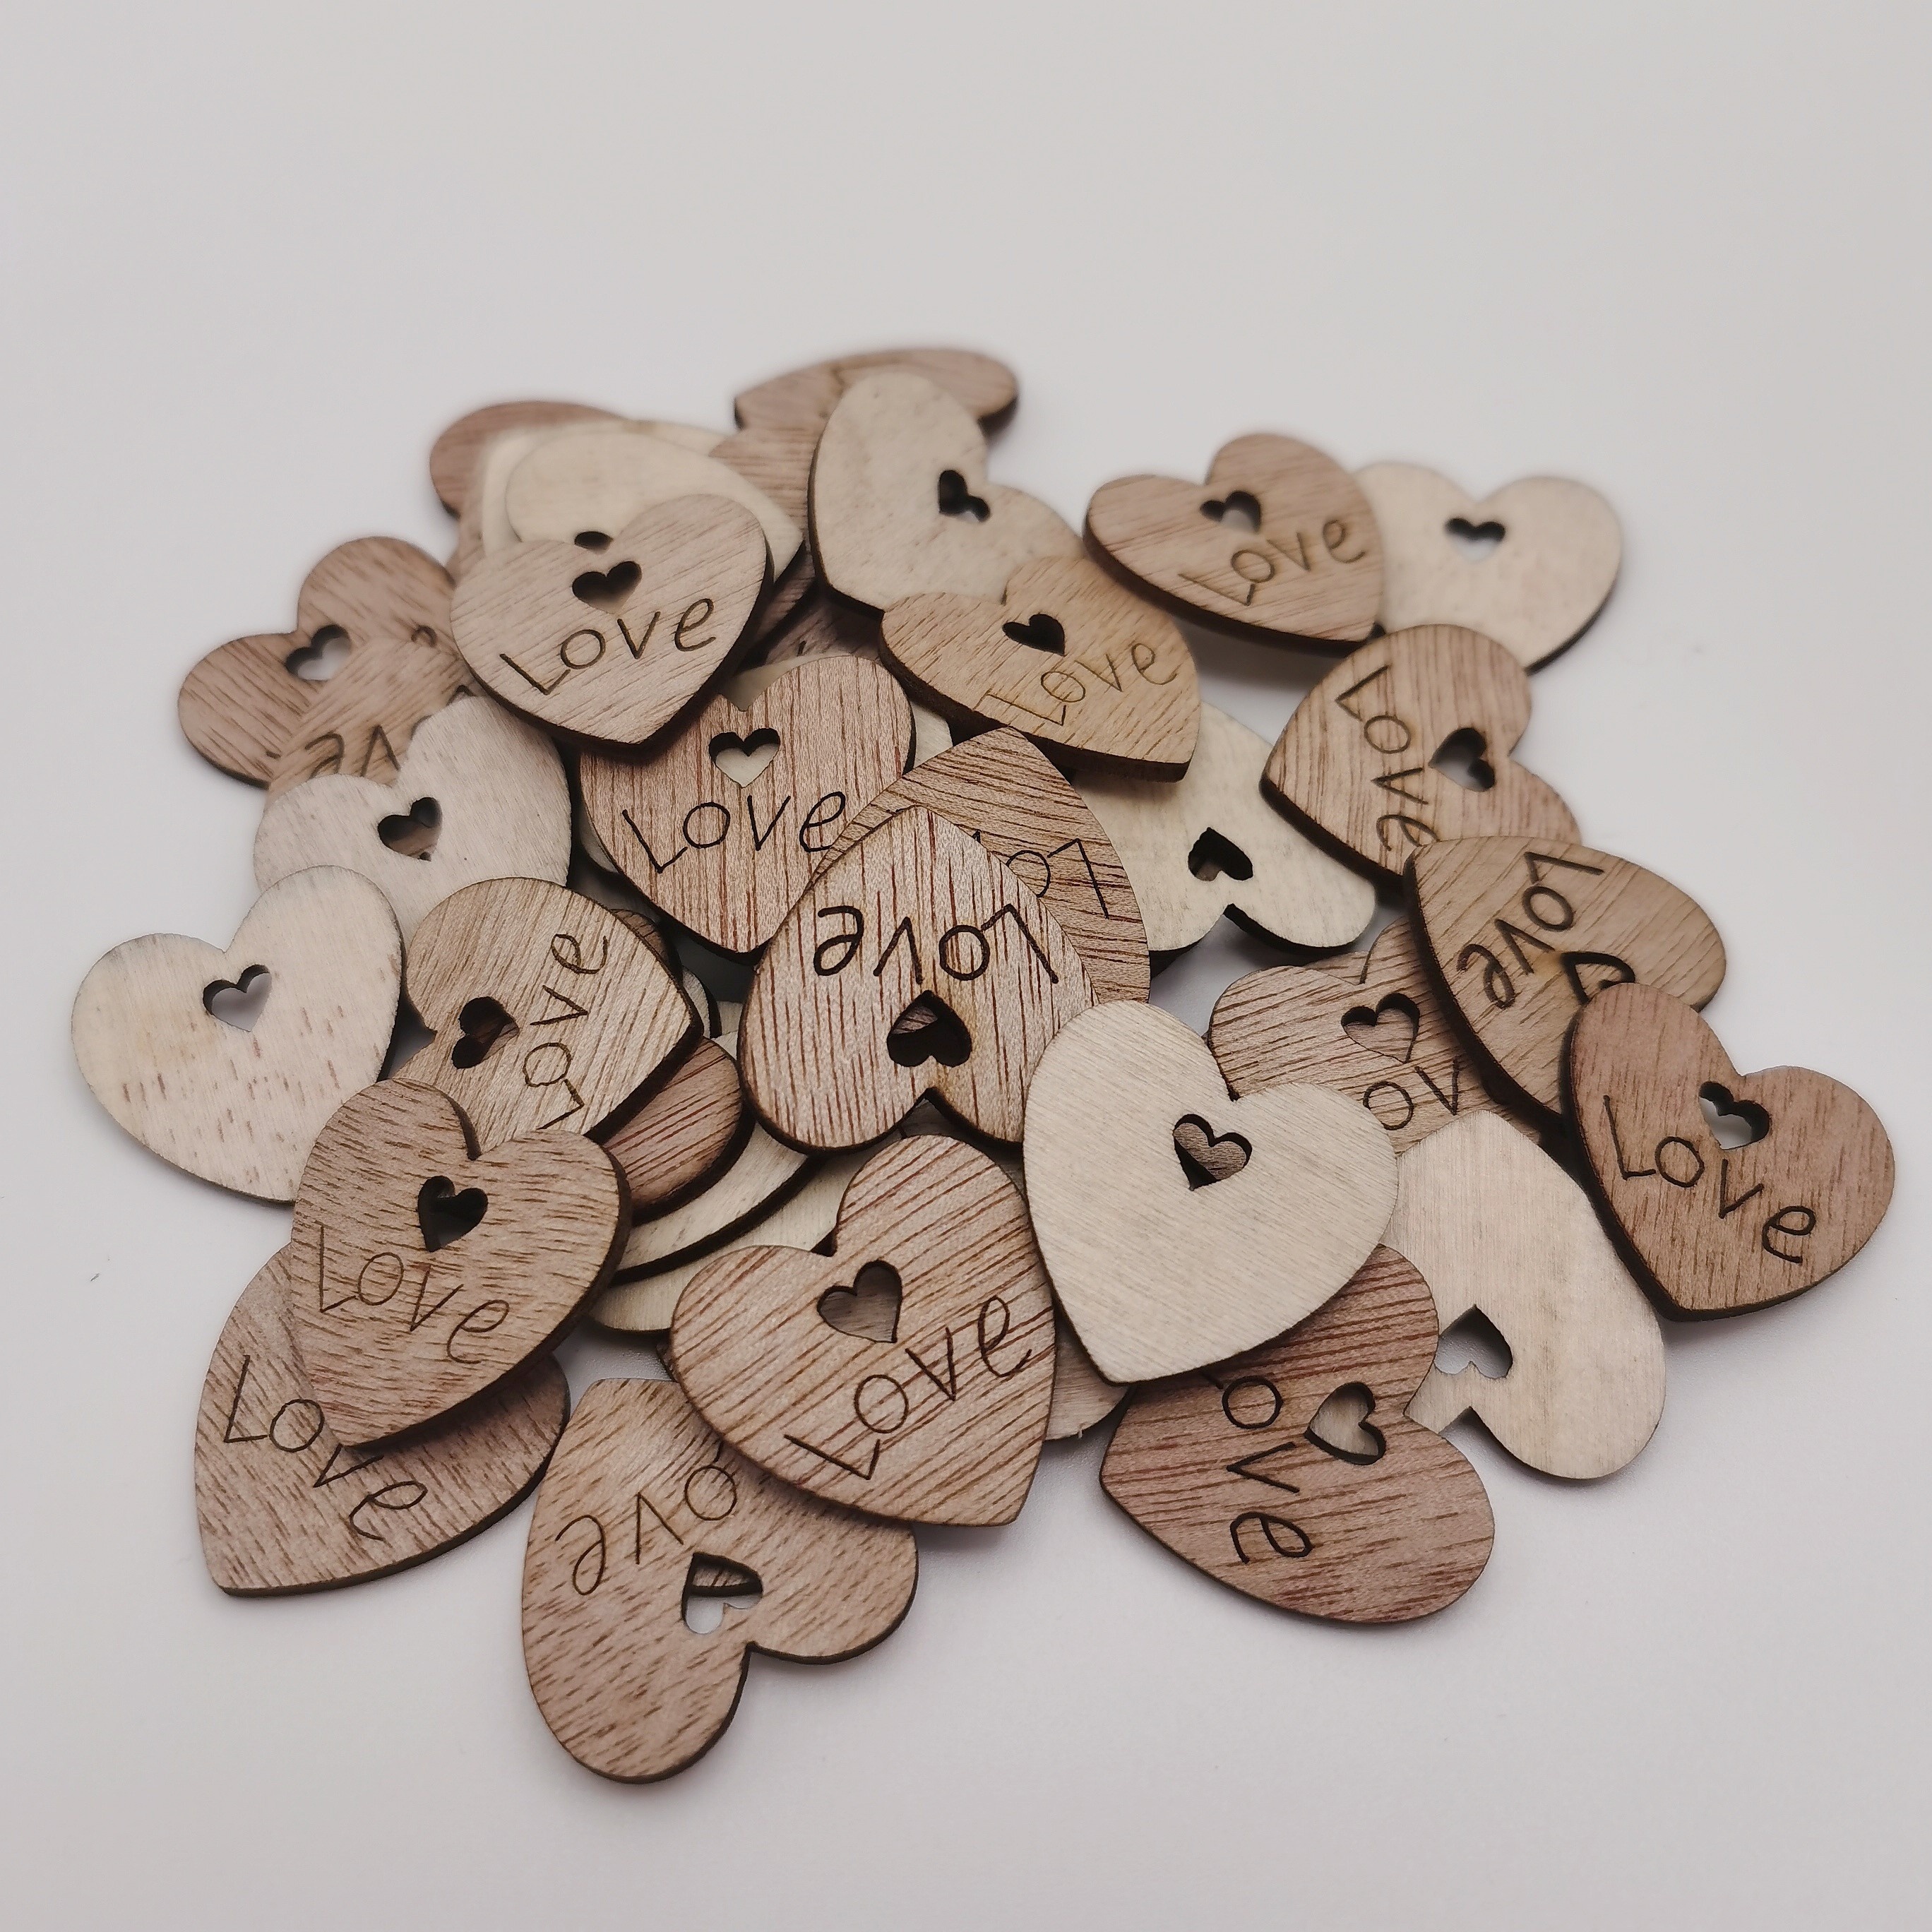 100pcs 1 Wooden Hearts for Crafts, Small Wood Hearts Cutout Slices, DIY Unfinished Wooden Ornaments Embellishments, Heart Sign Tag for Valentine's